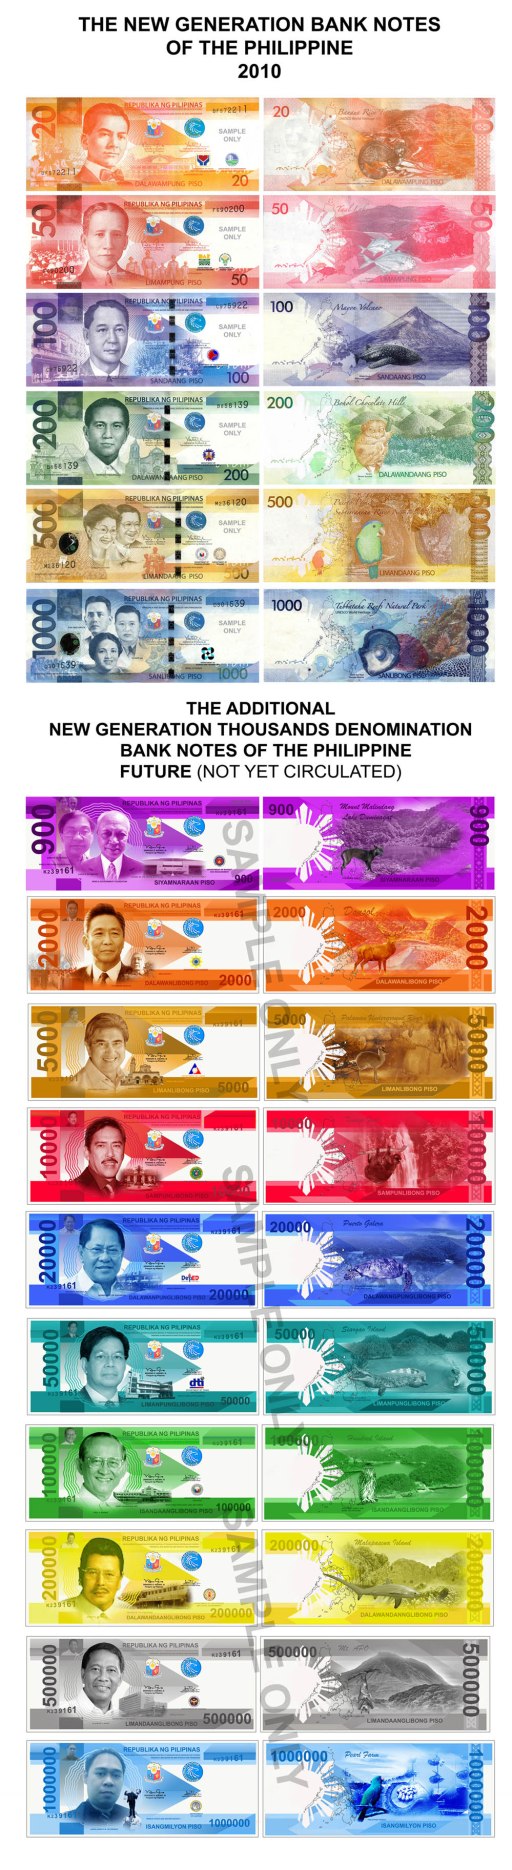 THE NEW AND FUTURE GENERATIONS BANK NOTES OF THE PHILIPPINE WEB SAMPLE ONLY 2